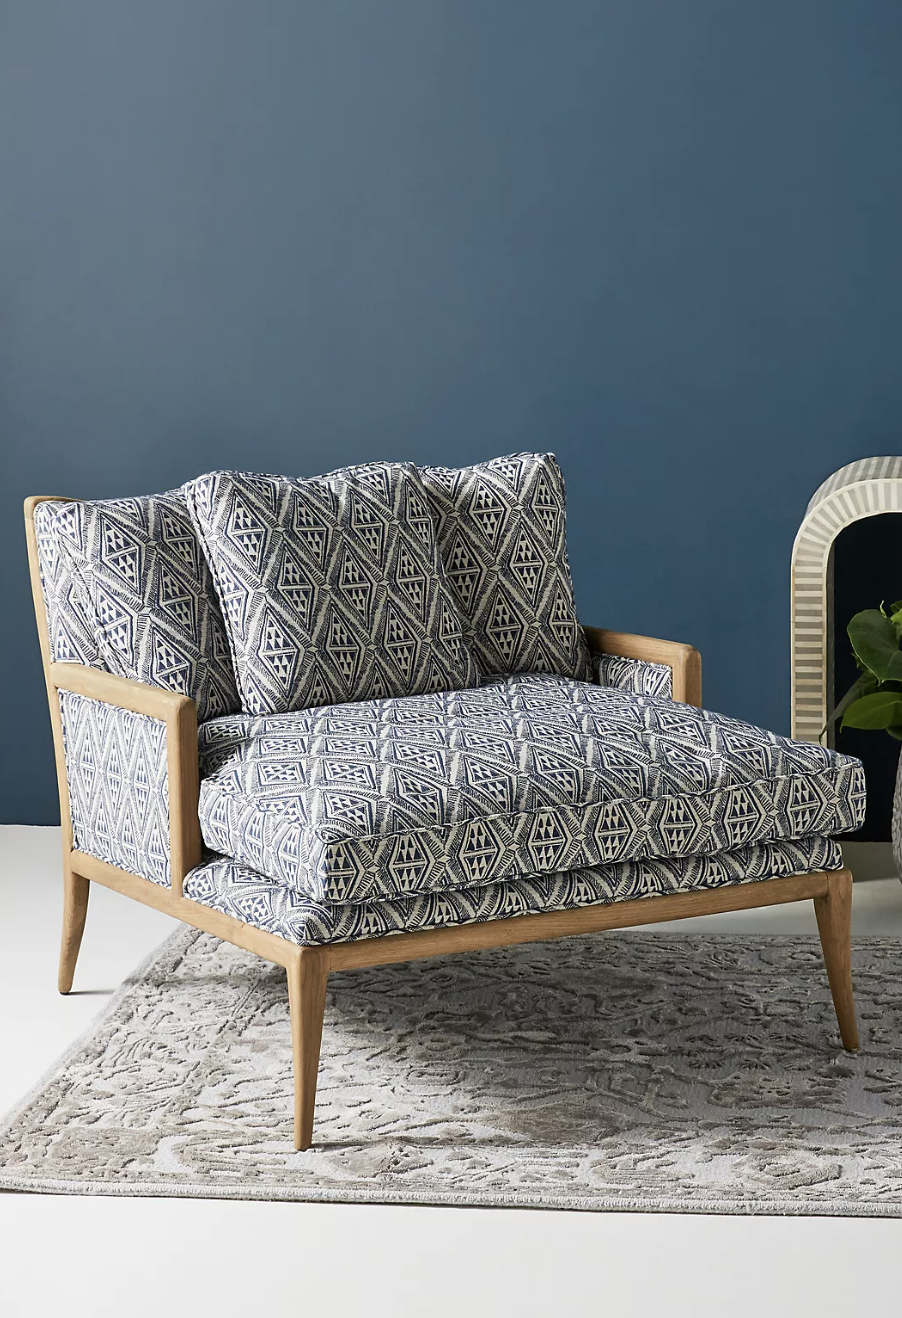 Anthropologie - $1498 - Florence Chaise